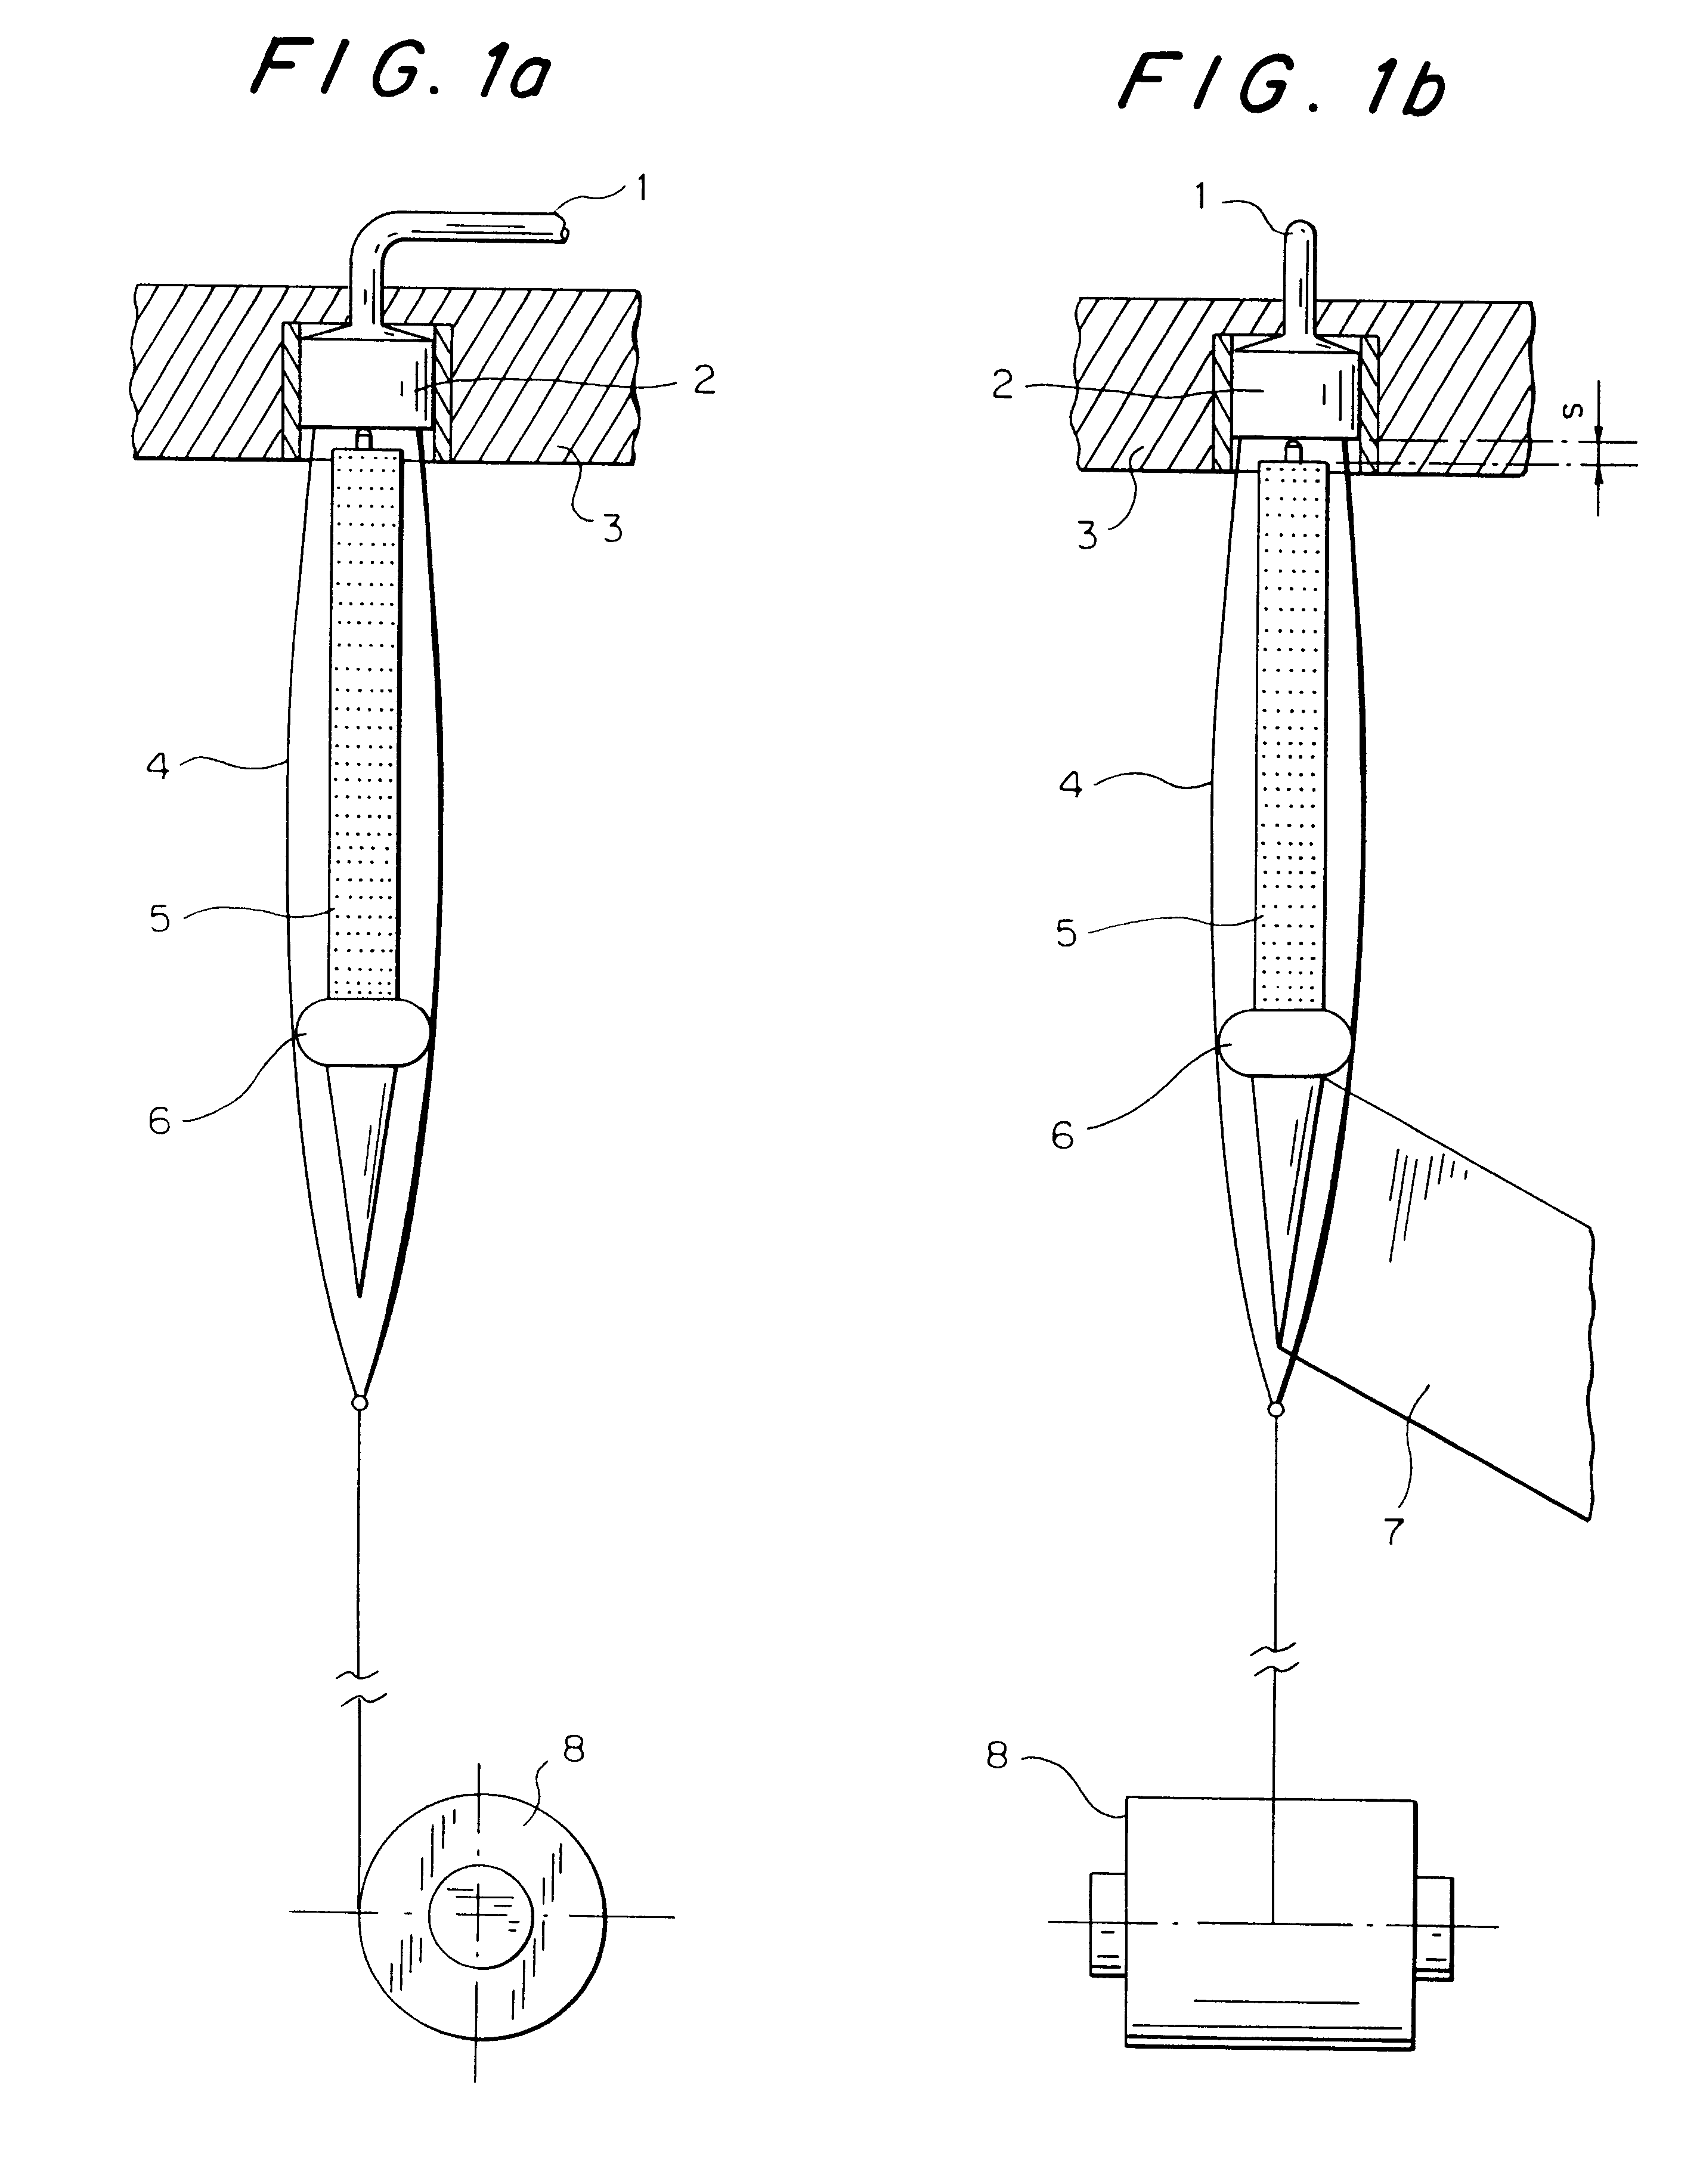 Device and method for producing microfilament yarns with high titer uniformity from thermoplastic polymers